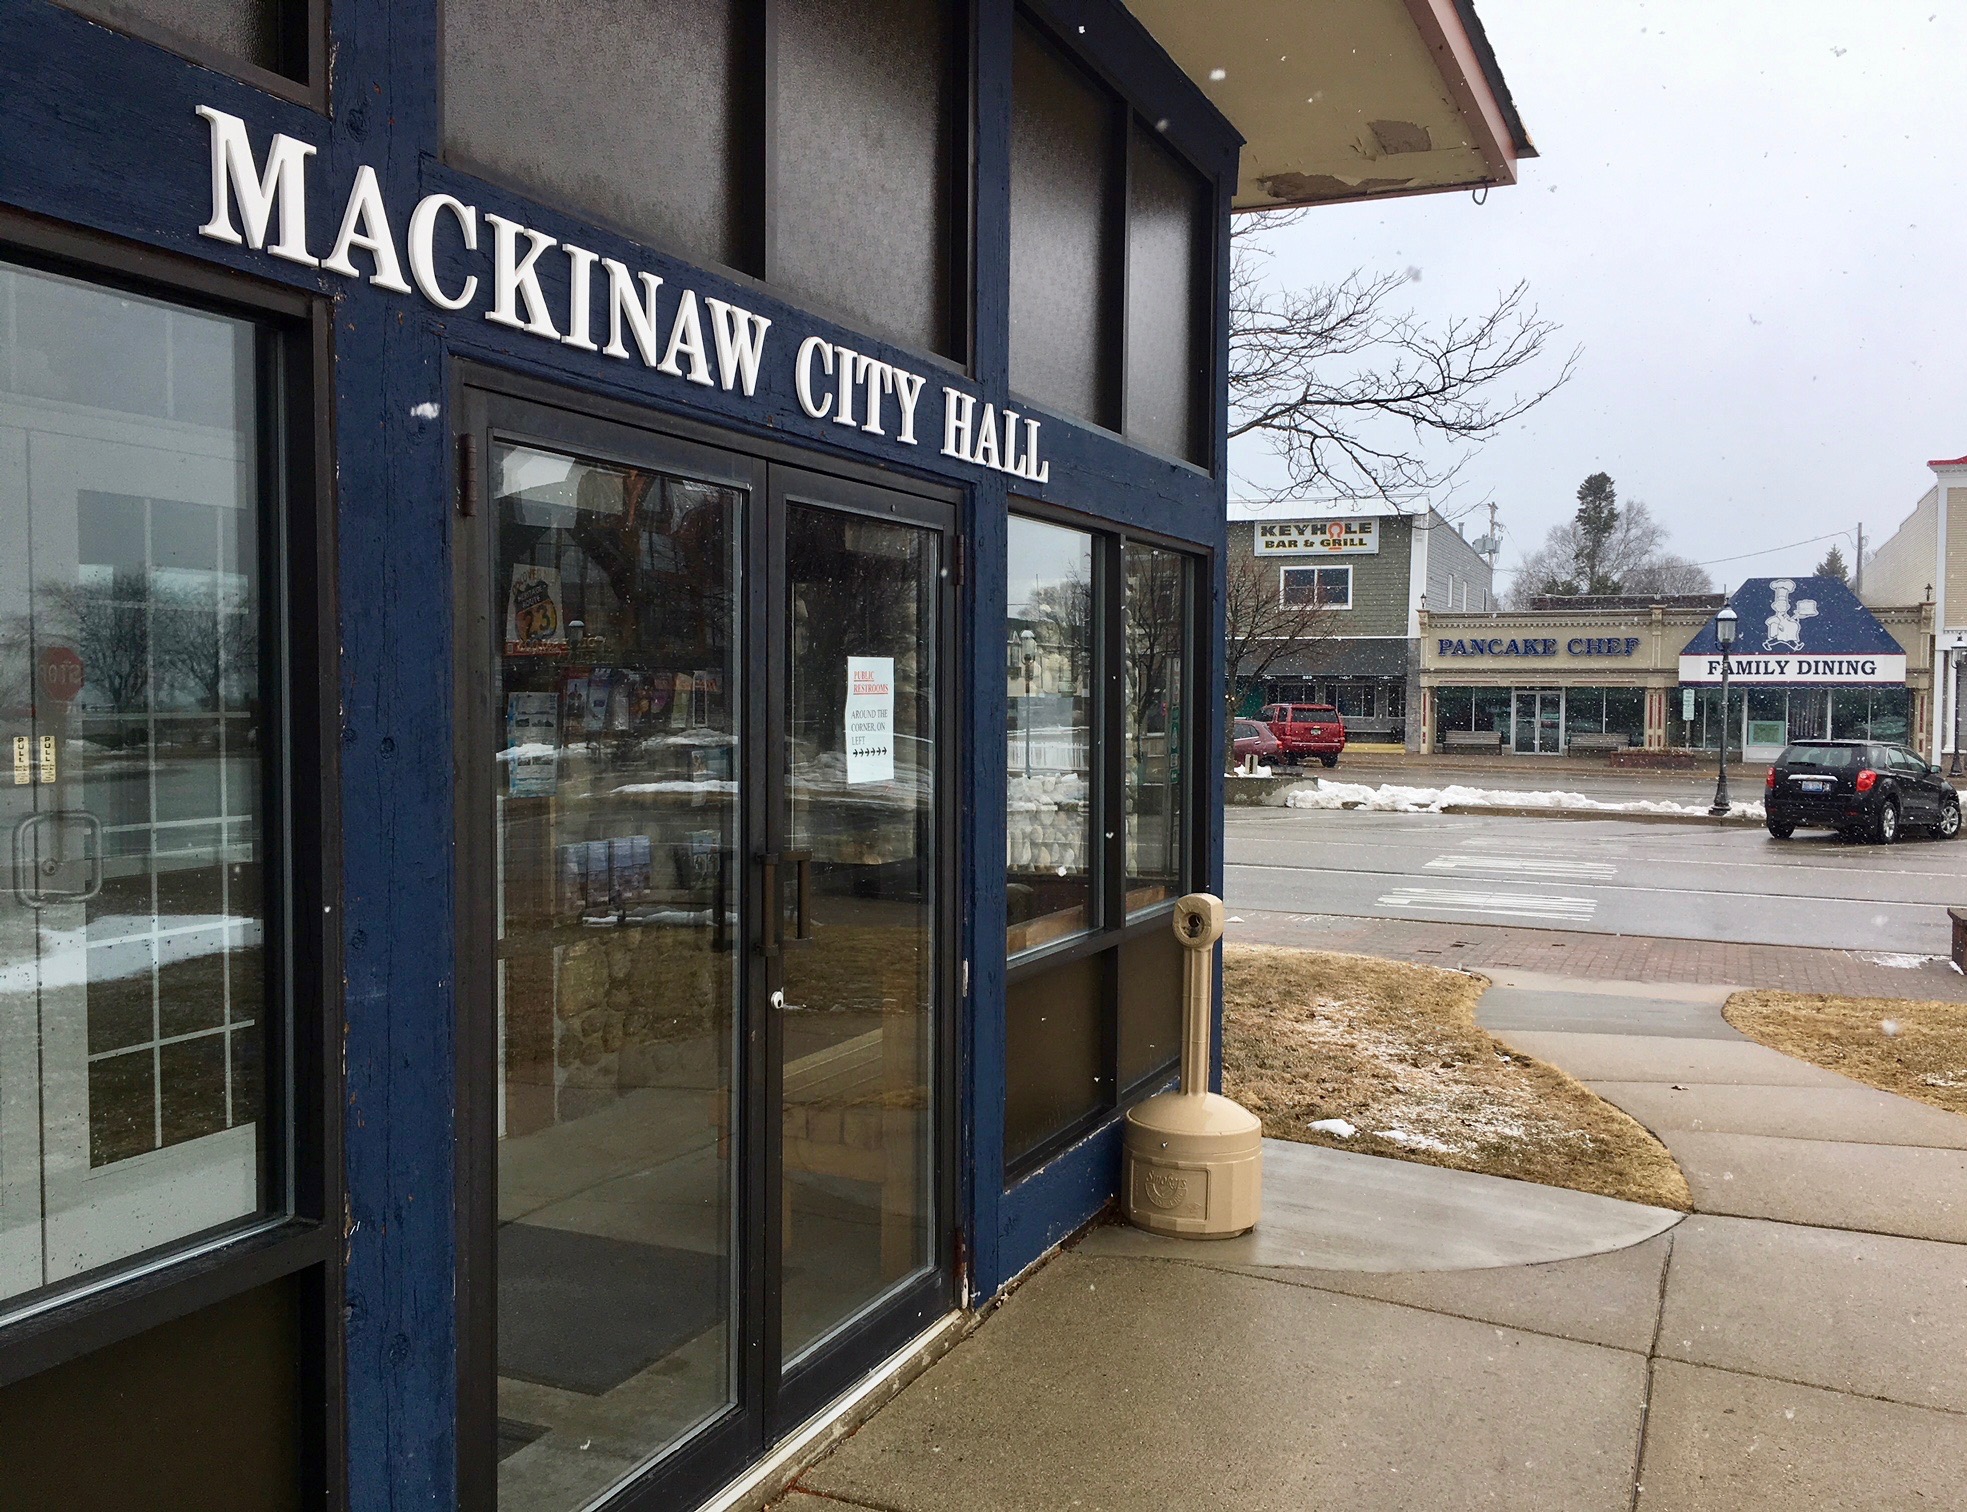 Greetings from Mackinaw City where Line 5 fears threaten a way of life